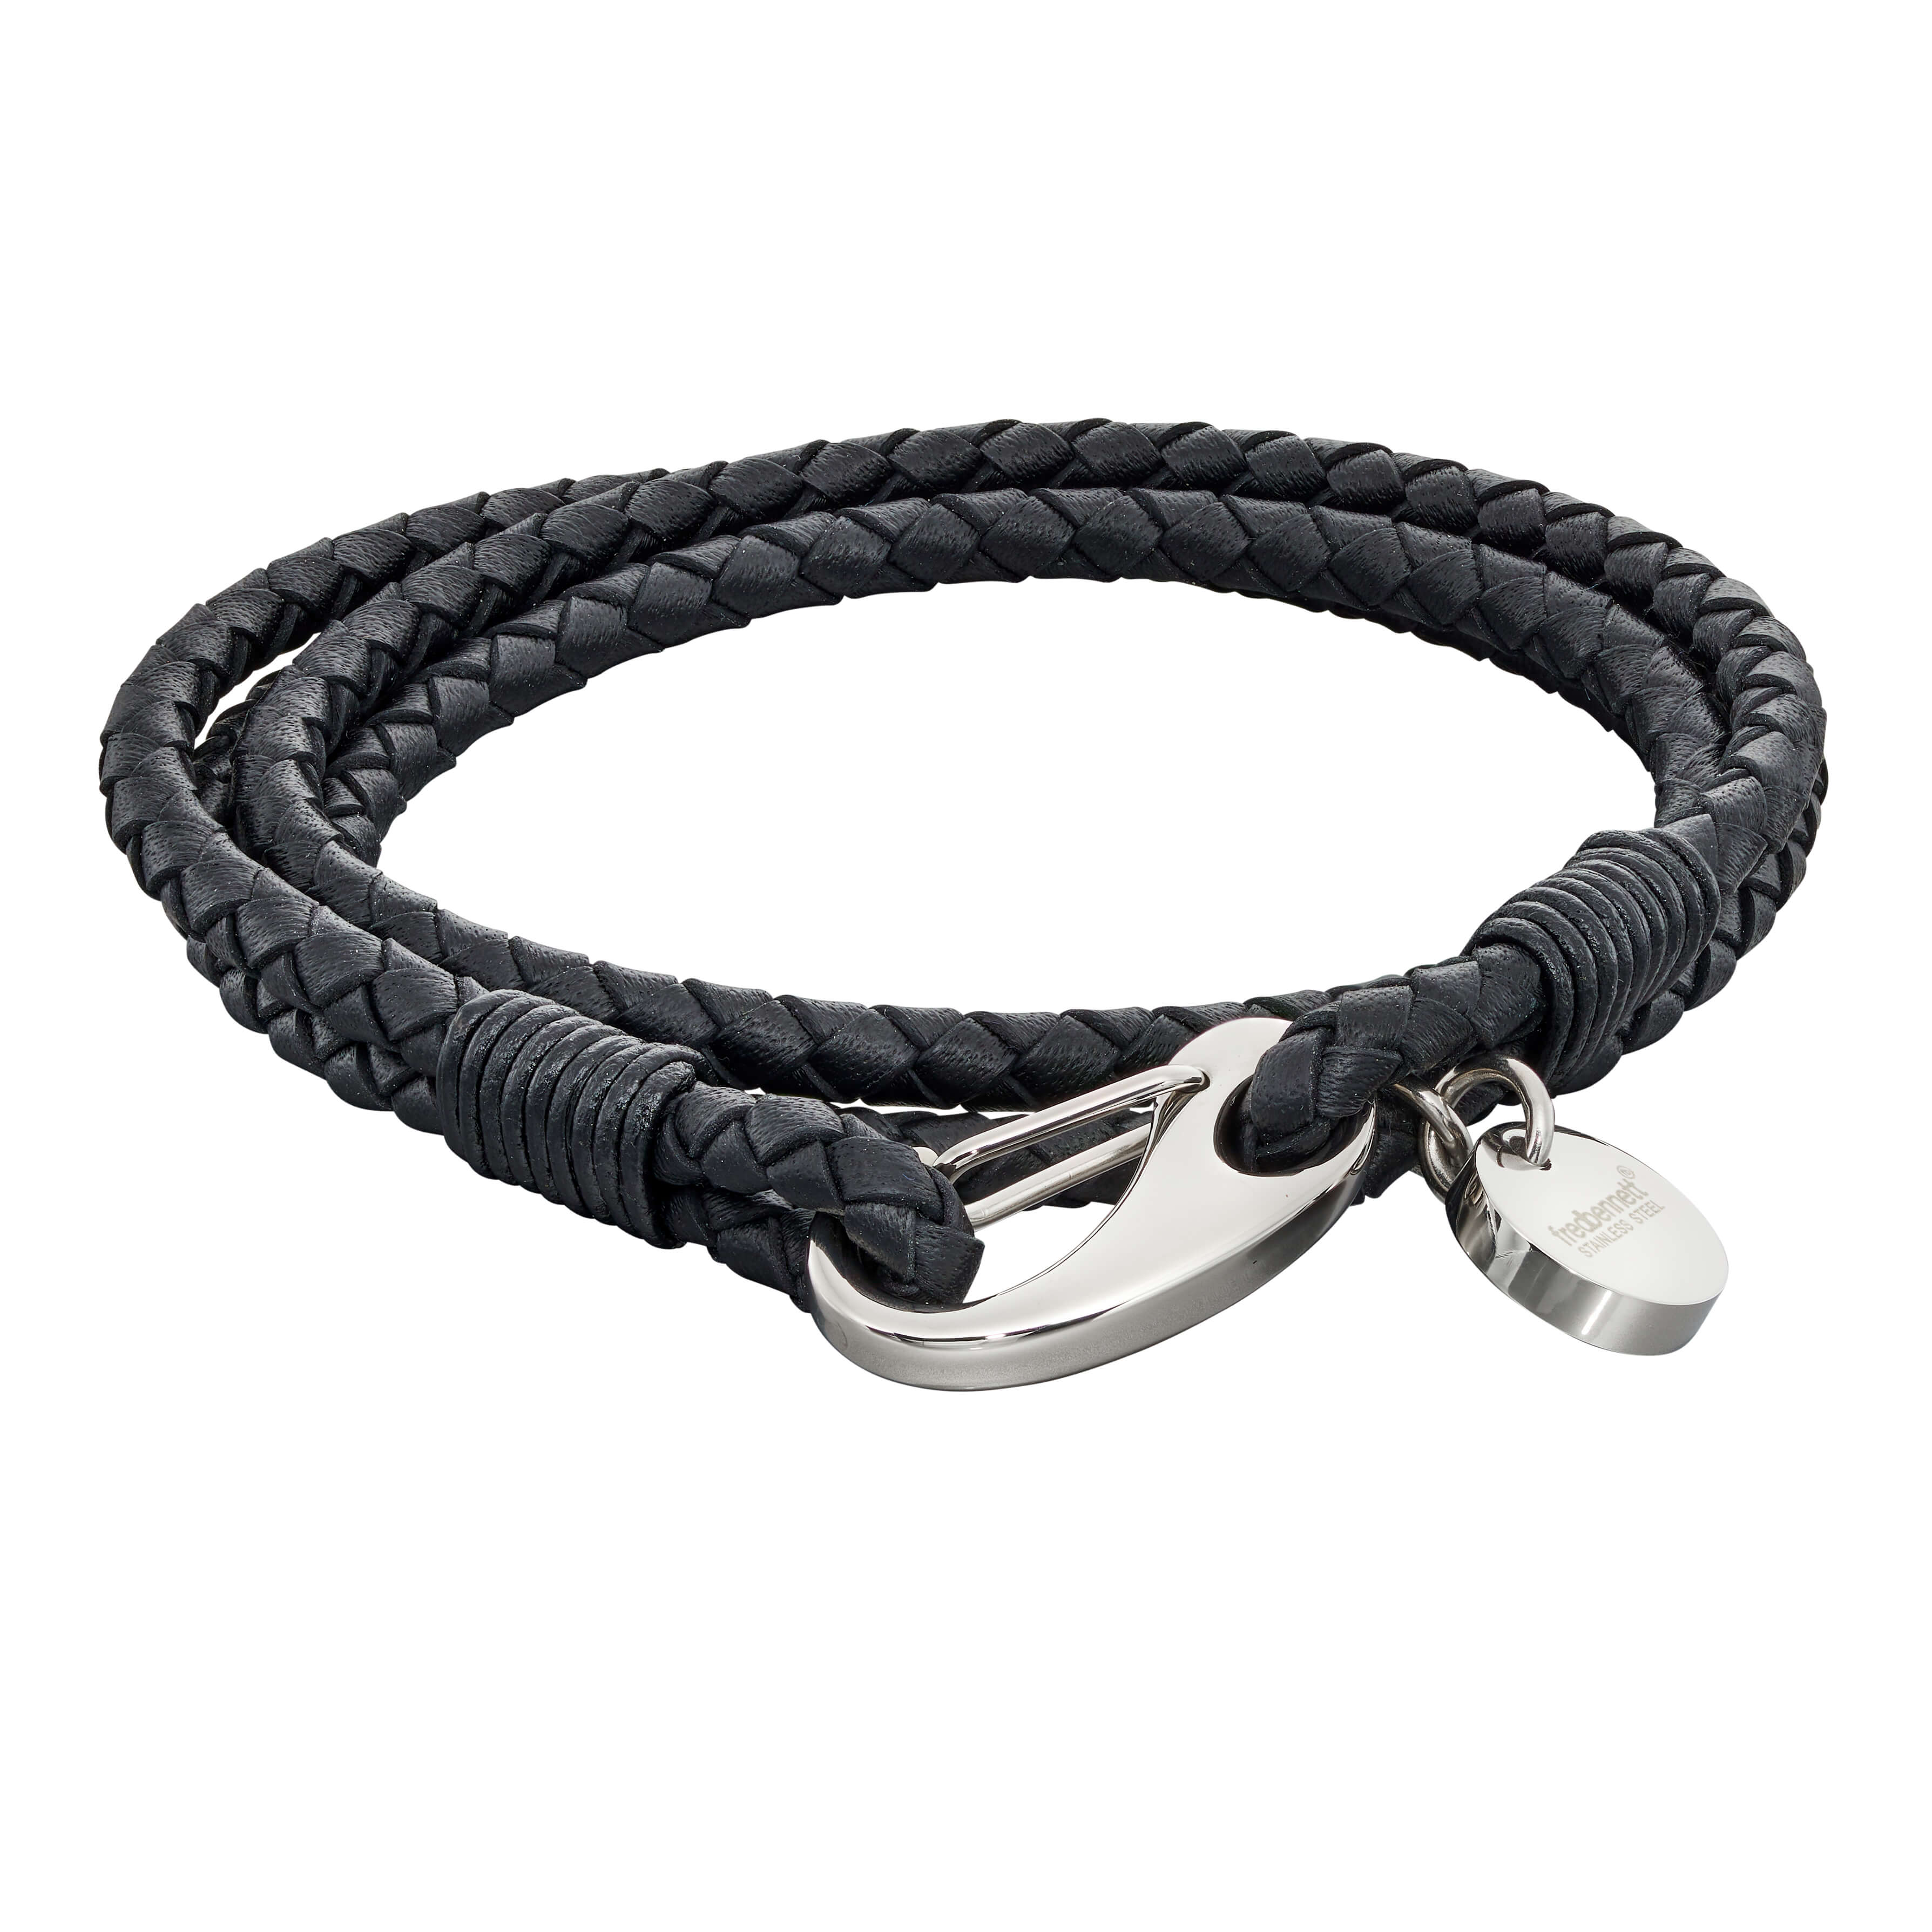 Stainless Steel & Black Woven Leather Double Strand Bracelet - FB0011 - Hallmark Jewellers Formby & The Jewellers Bench Widnes